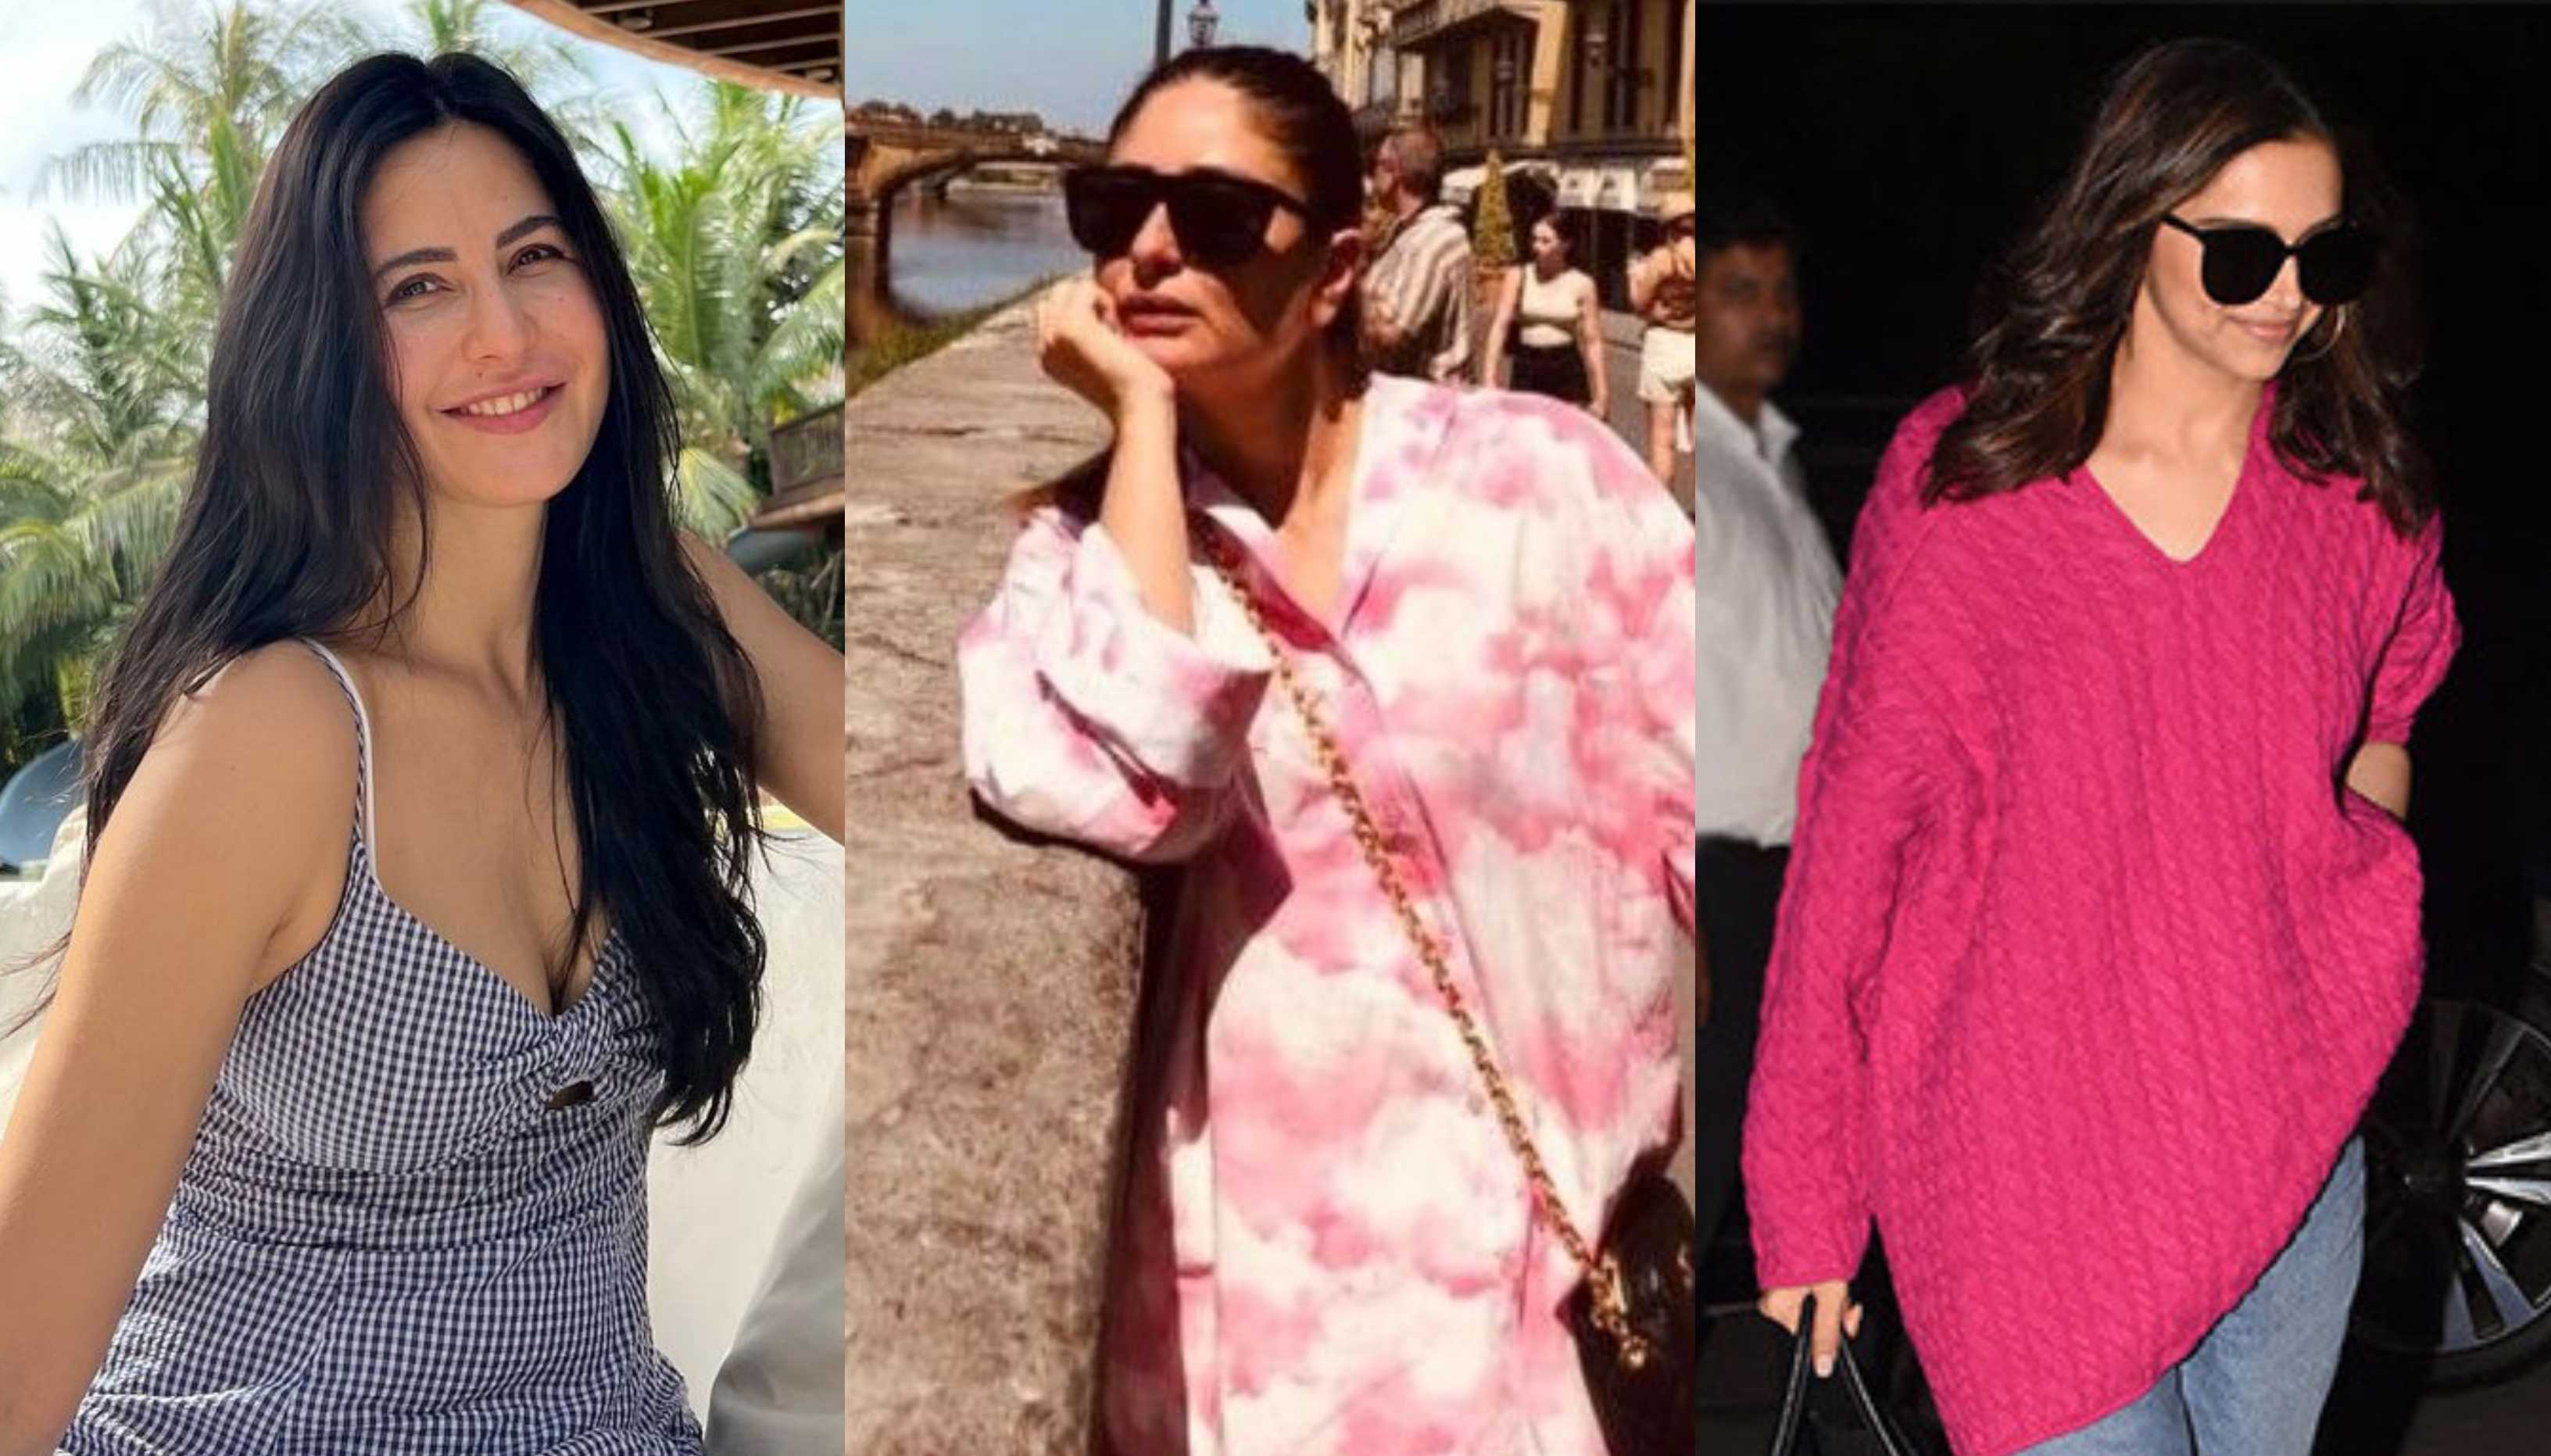 Here to report that these Bollywood actresses are not pregnant, no matter what you may have heard